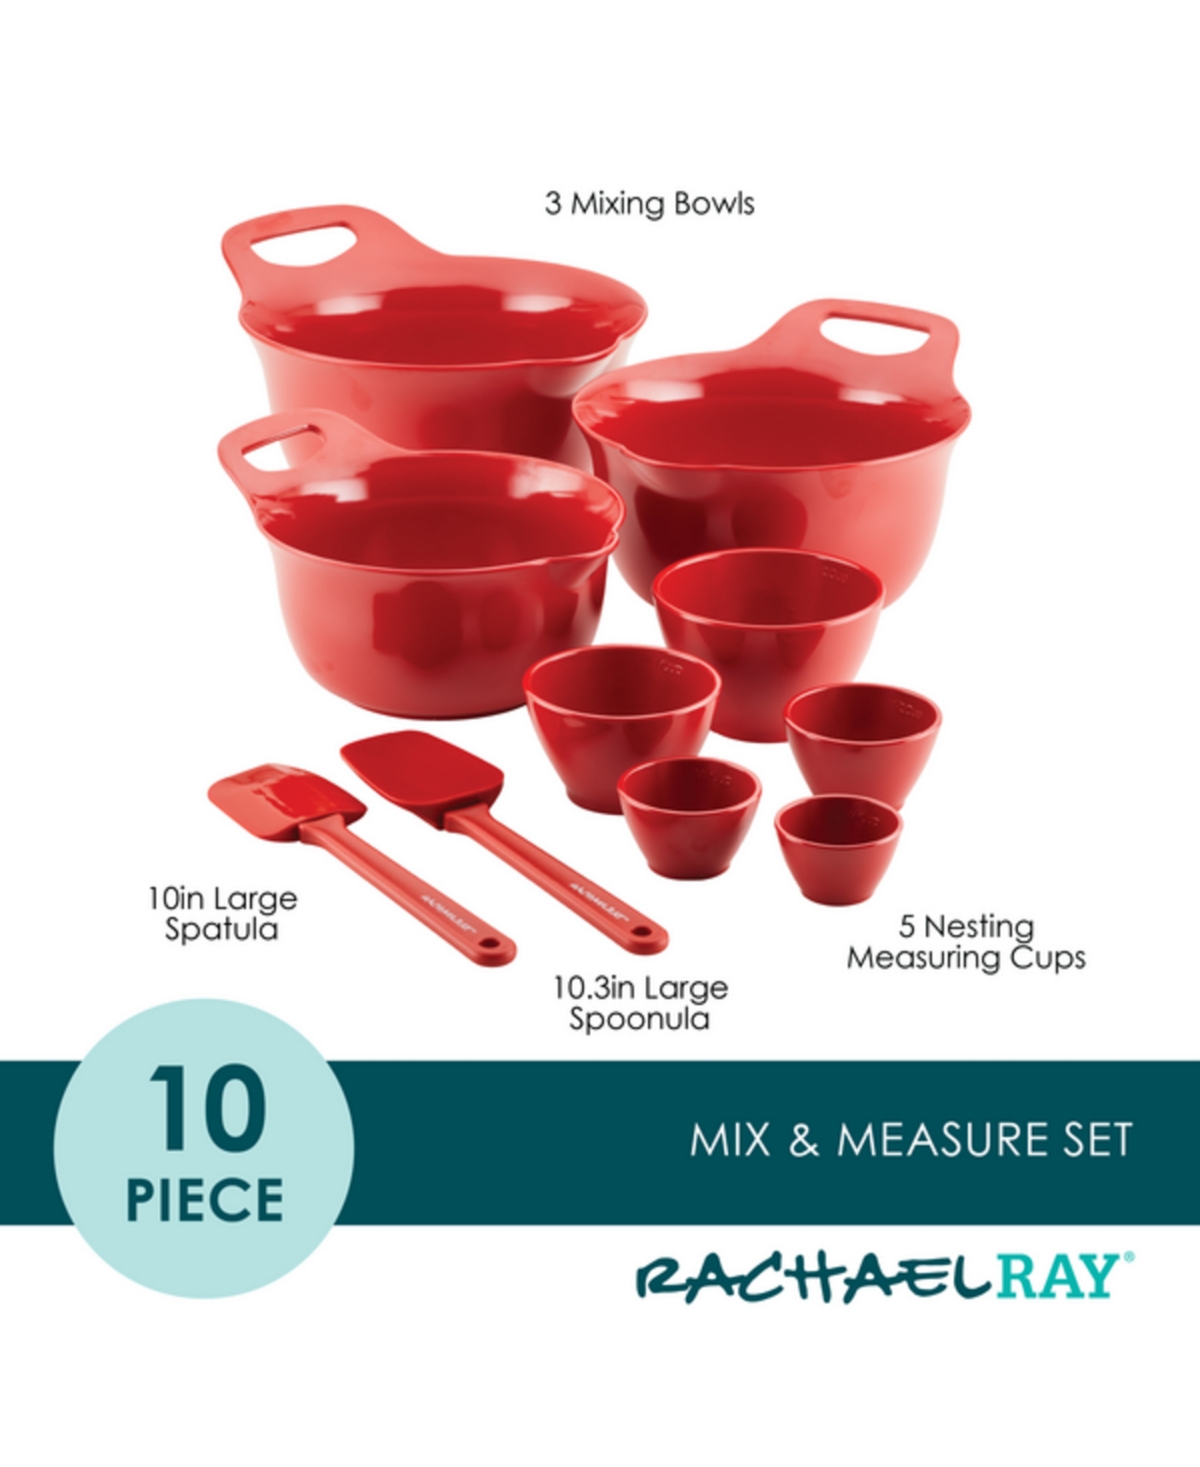 Rachael Ray 10-pc. Mix And Measure Mixing Bowl Measuring Cup And Utensil Set In Orange